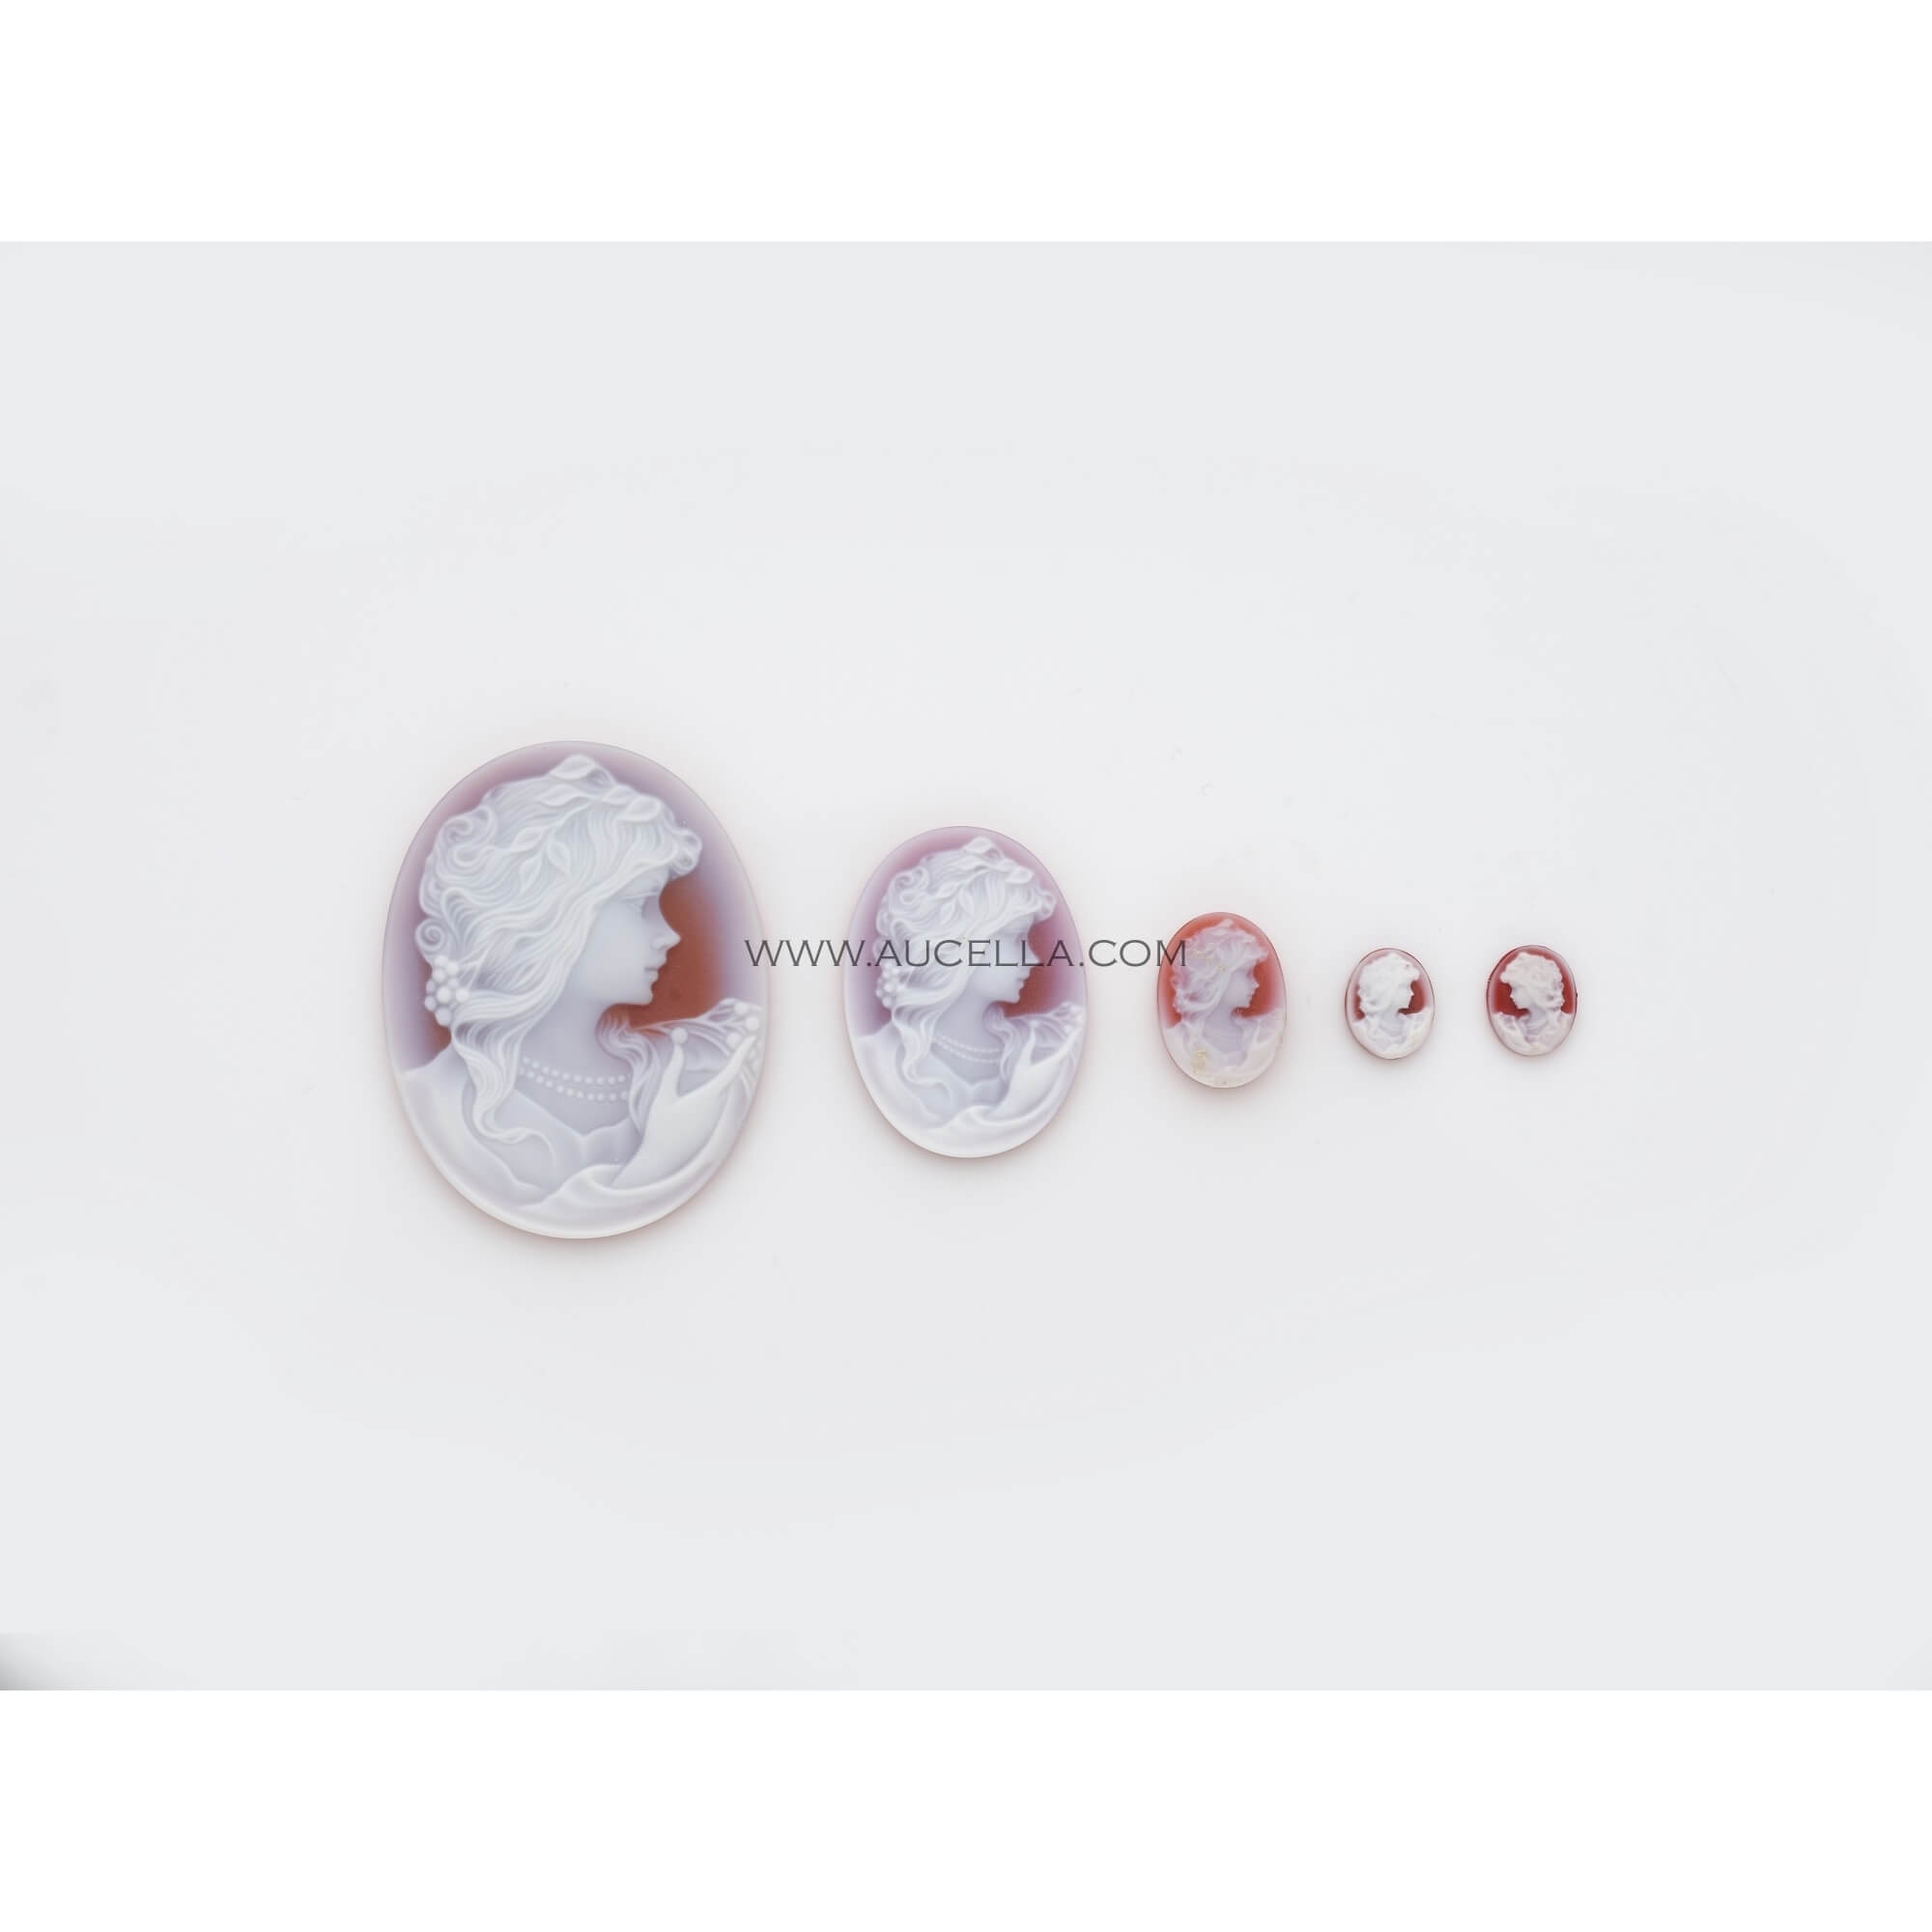 Woman face on red agate cameos